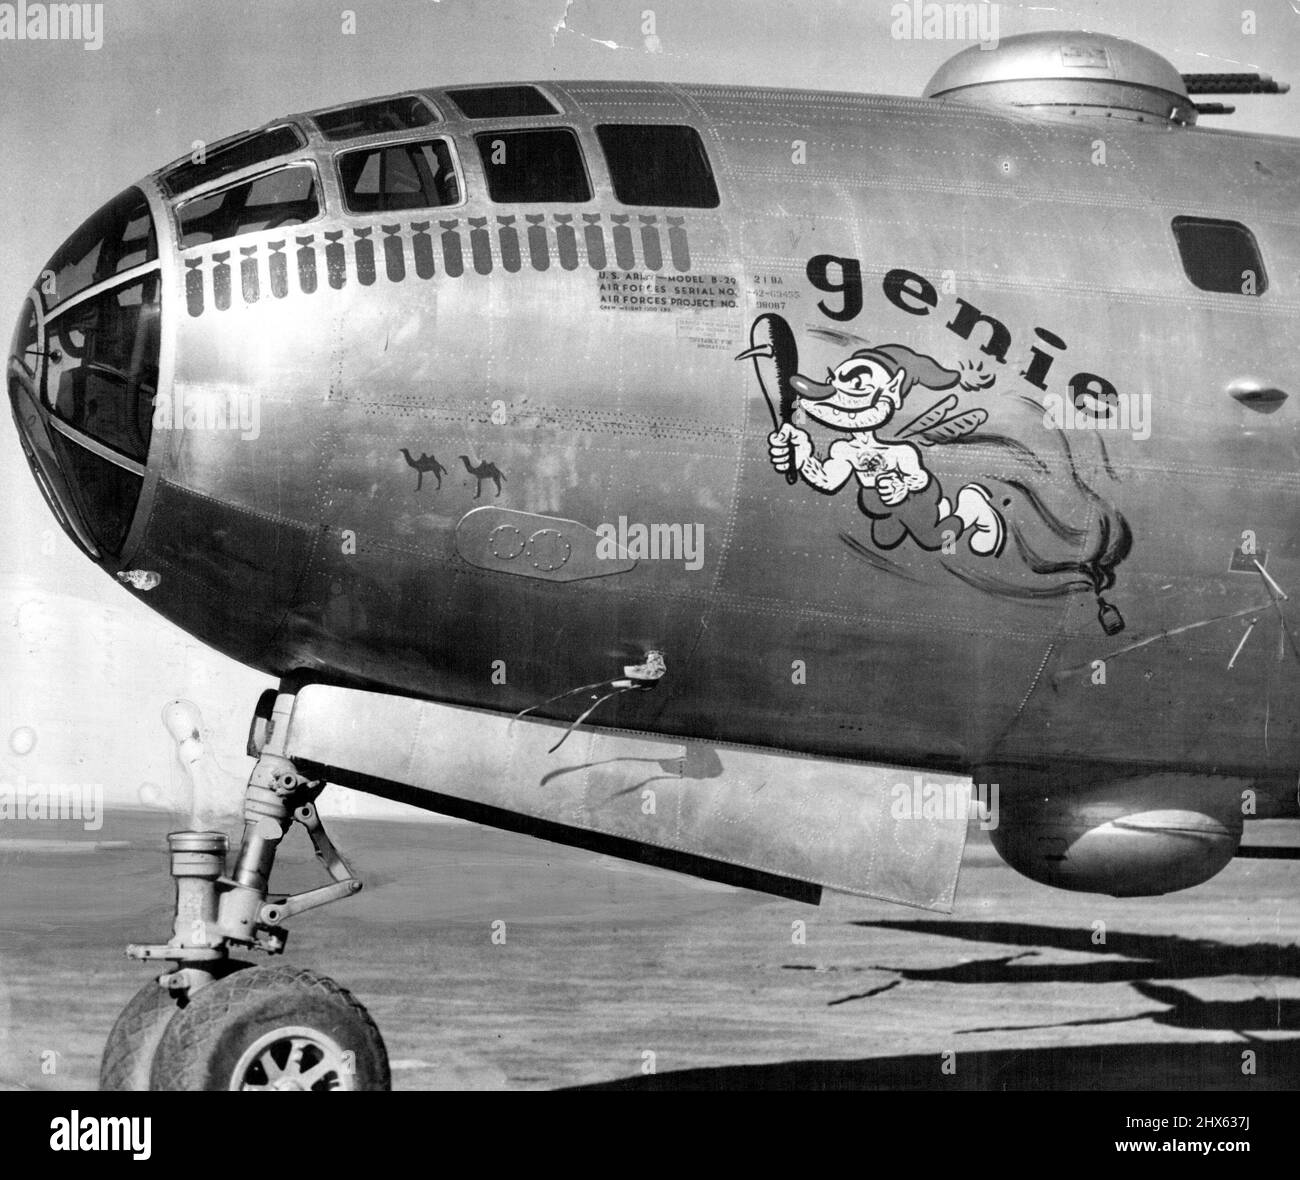 Decorated with a representation of a genie emerging from a bottle, the U.S. Super-Fortress Genie, now at Mascot, is decorated with painted bombs to indicate the number of bombing raids she has made over targets in Japan. June 24, 1945. Stock Photo